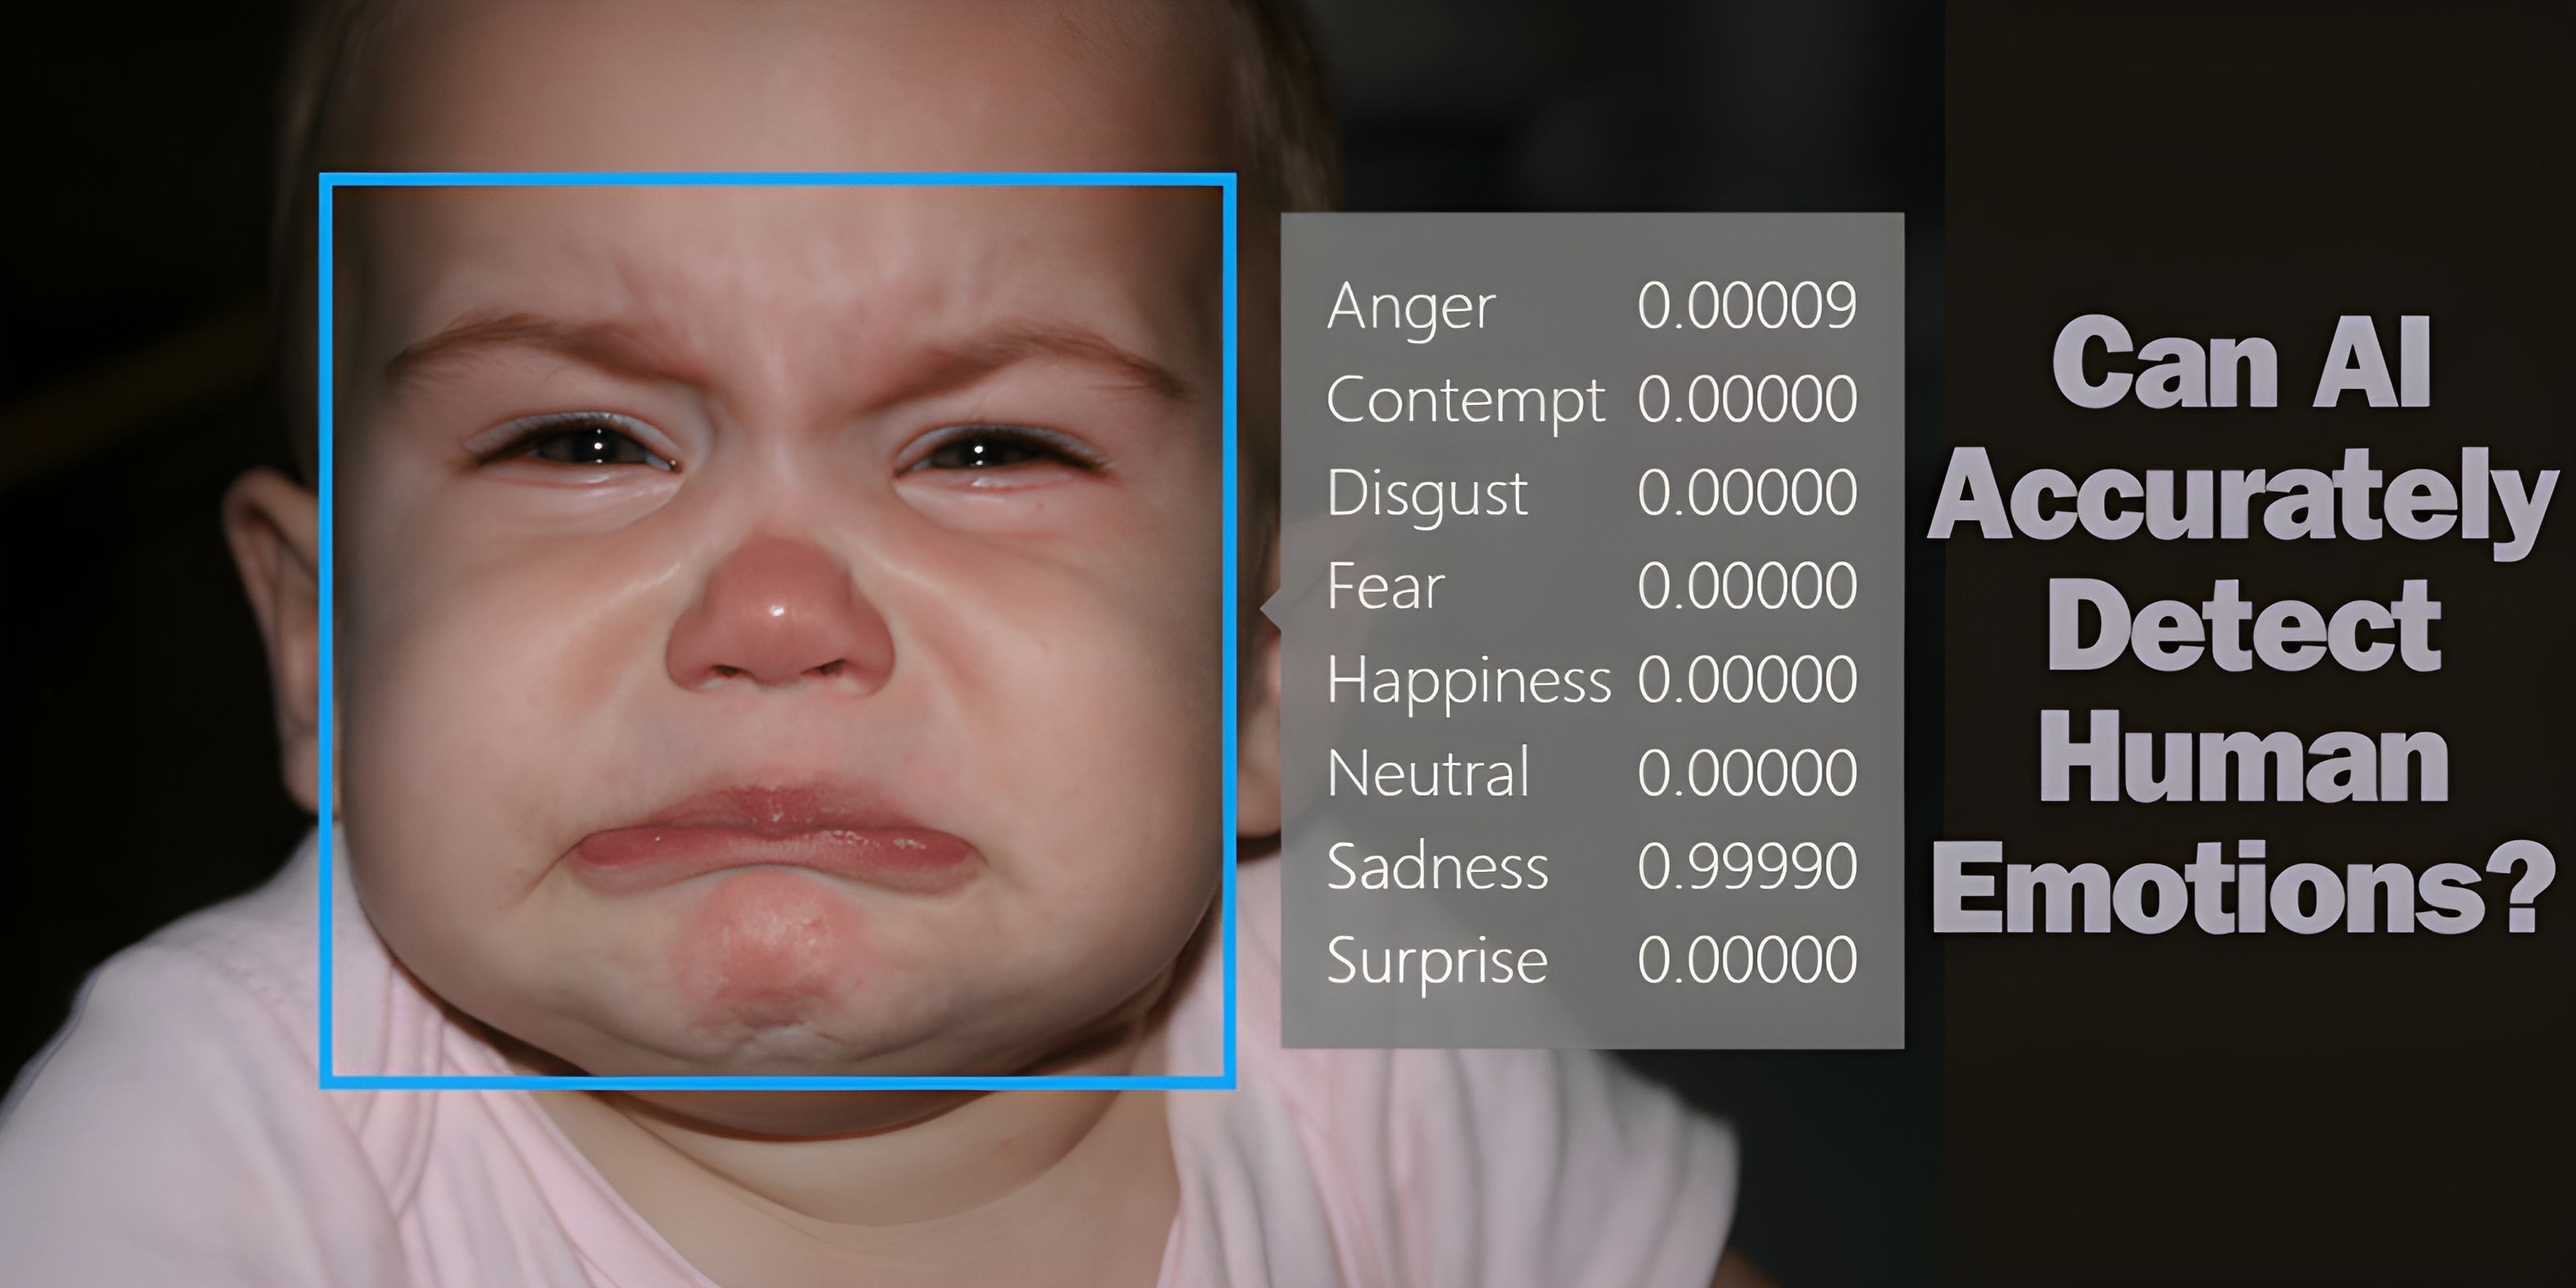 Can AI Accurately Detect Human Emotions?